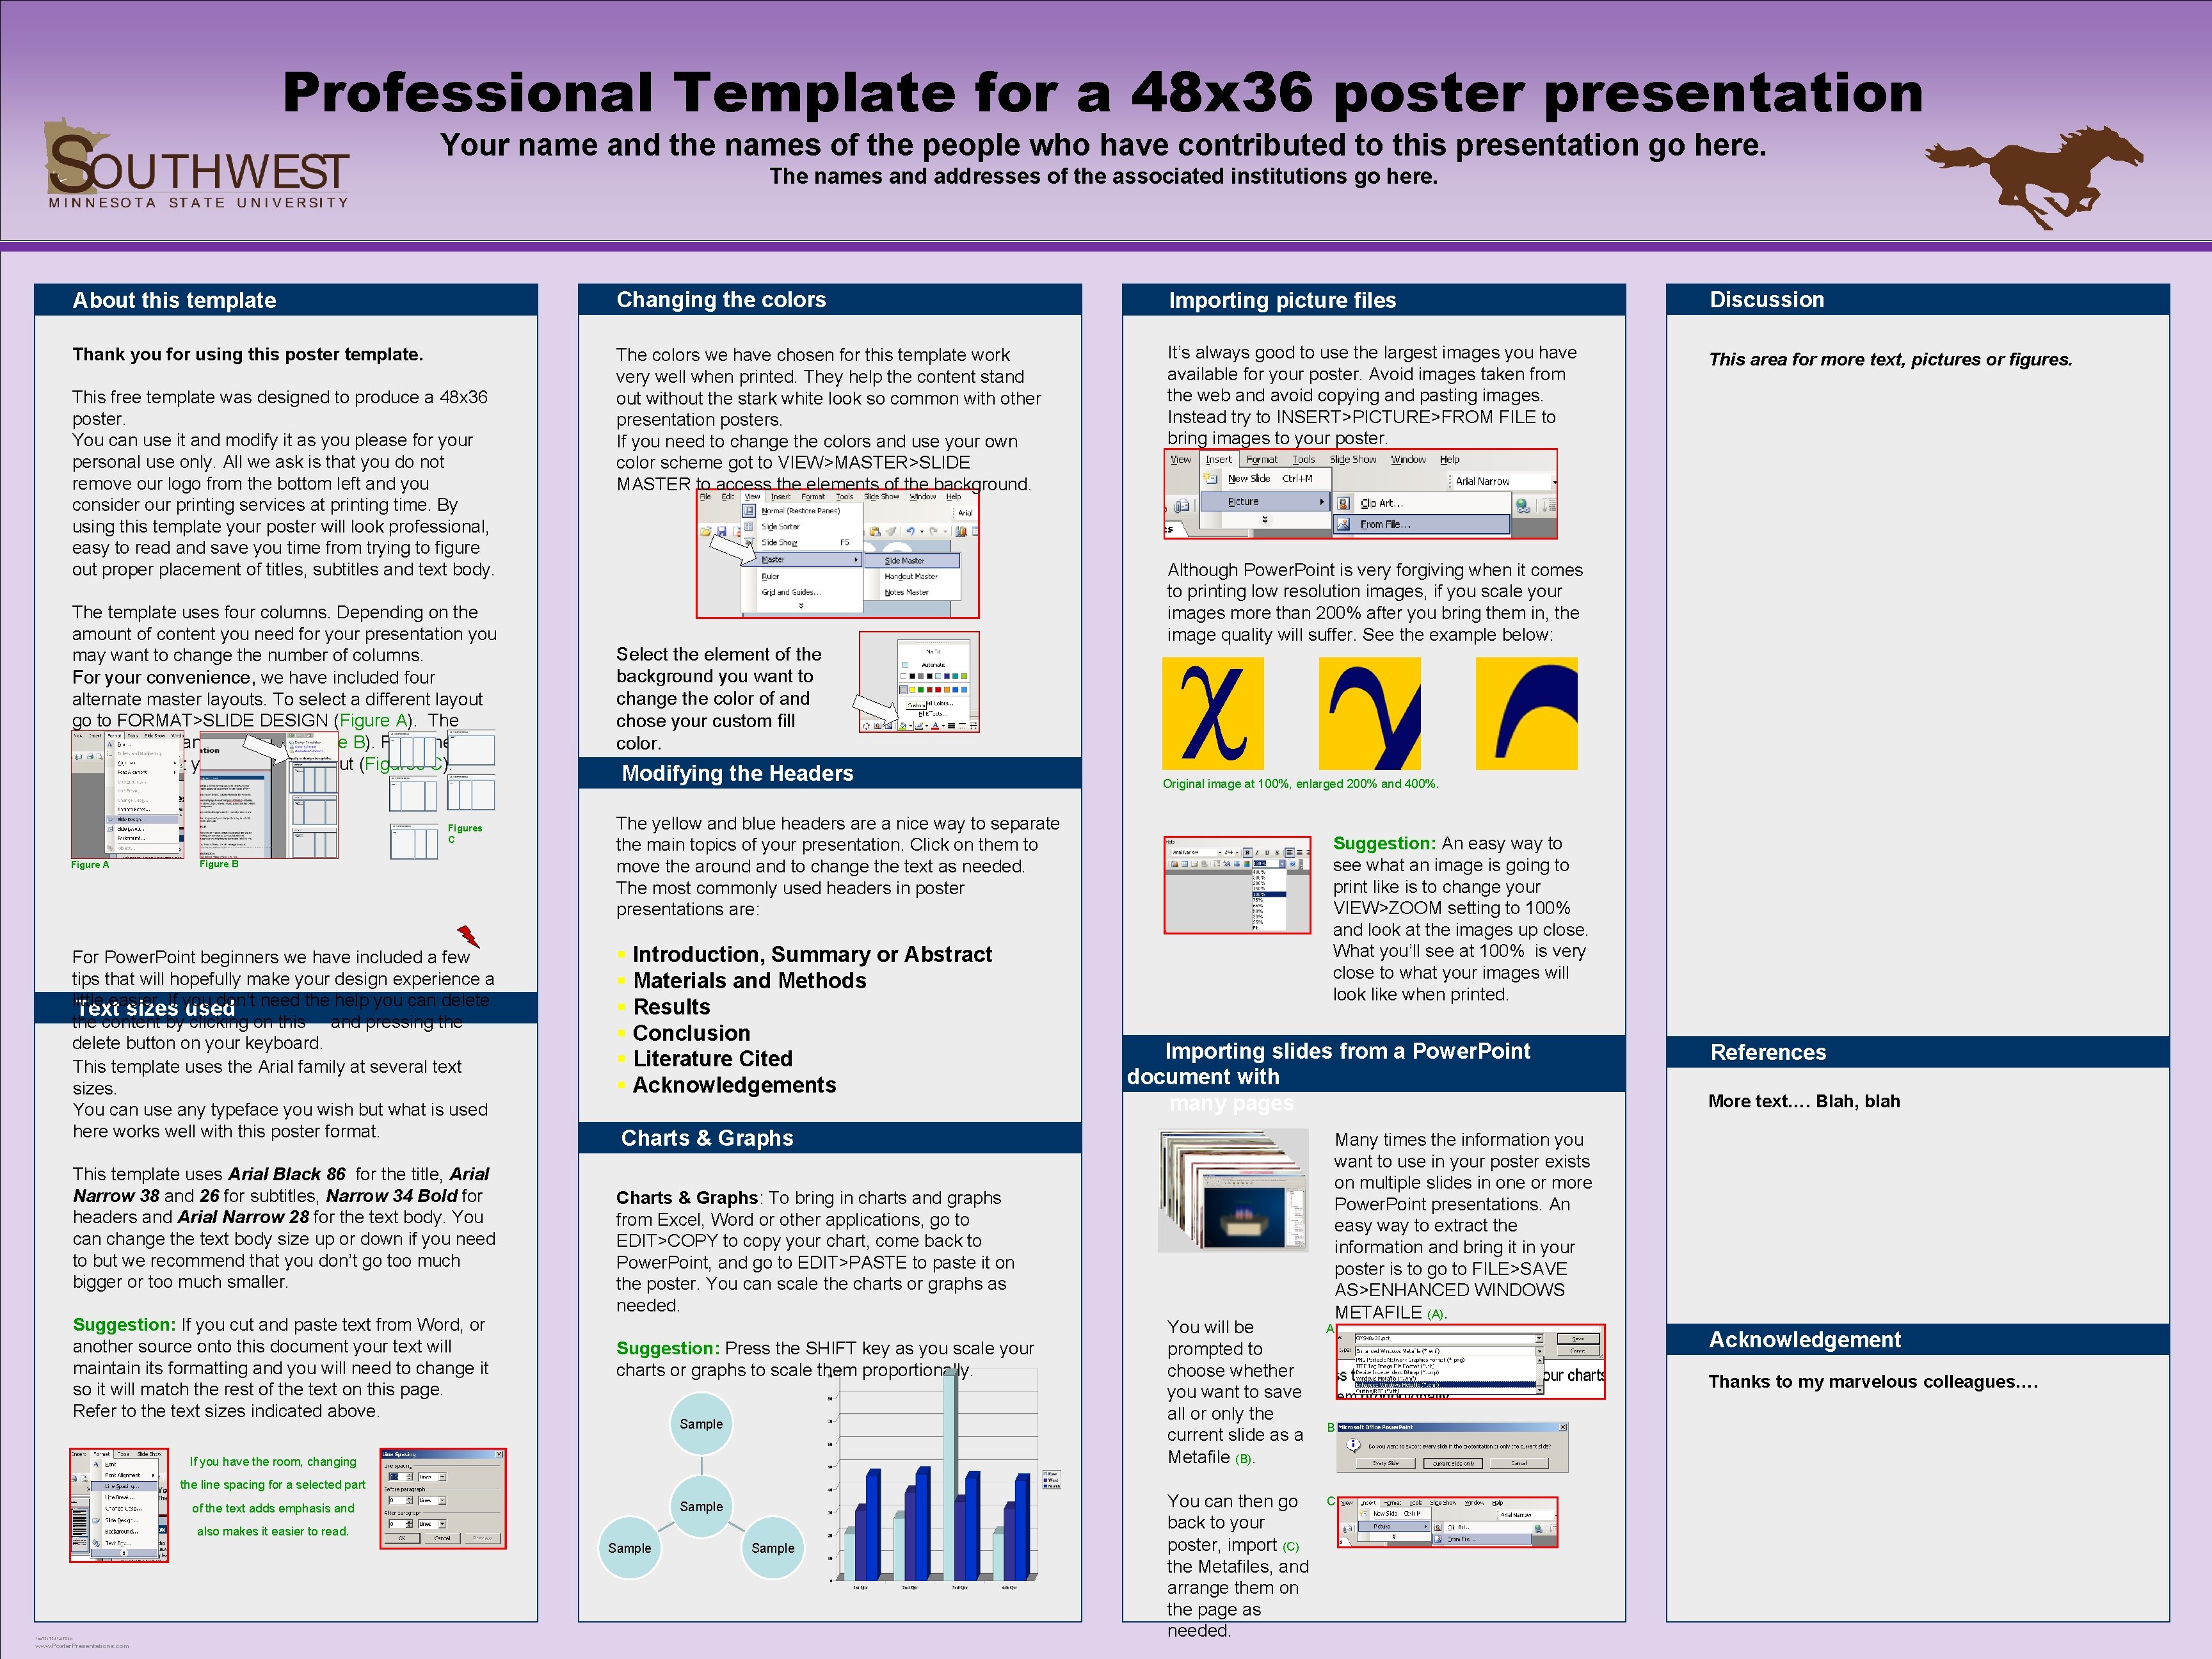 Professional Template for a 48 x 36 poster presentation Your name and the names